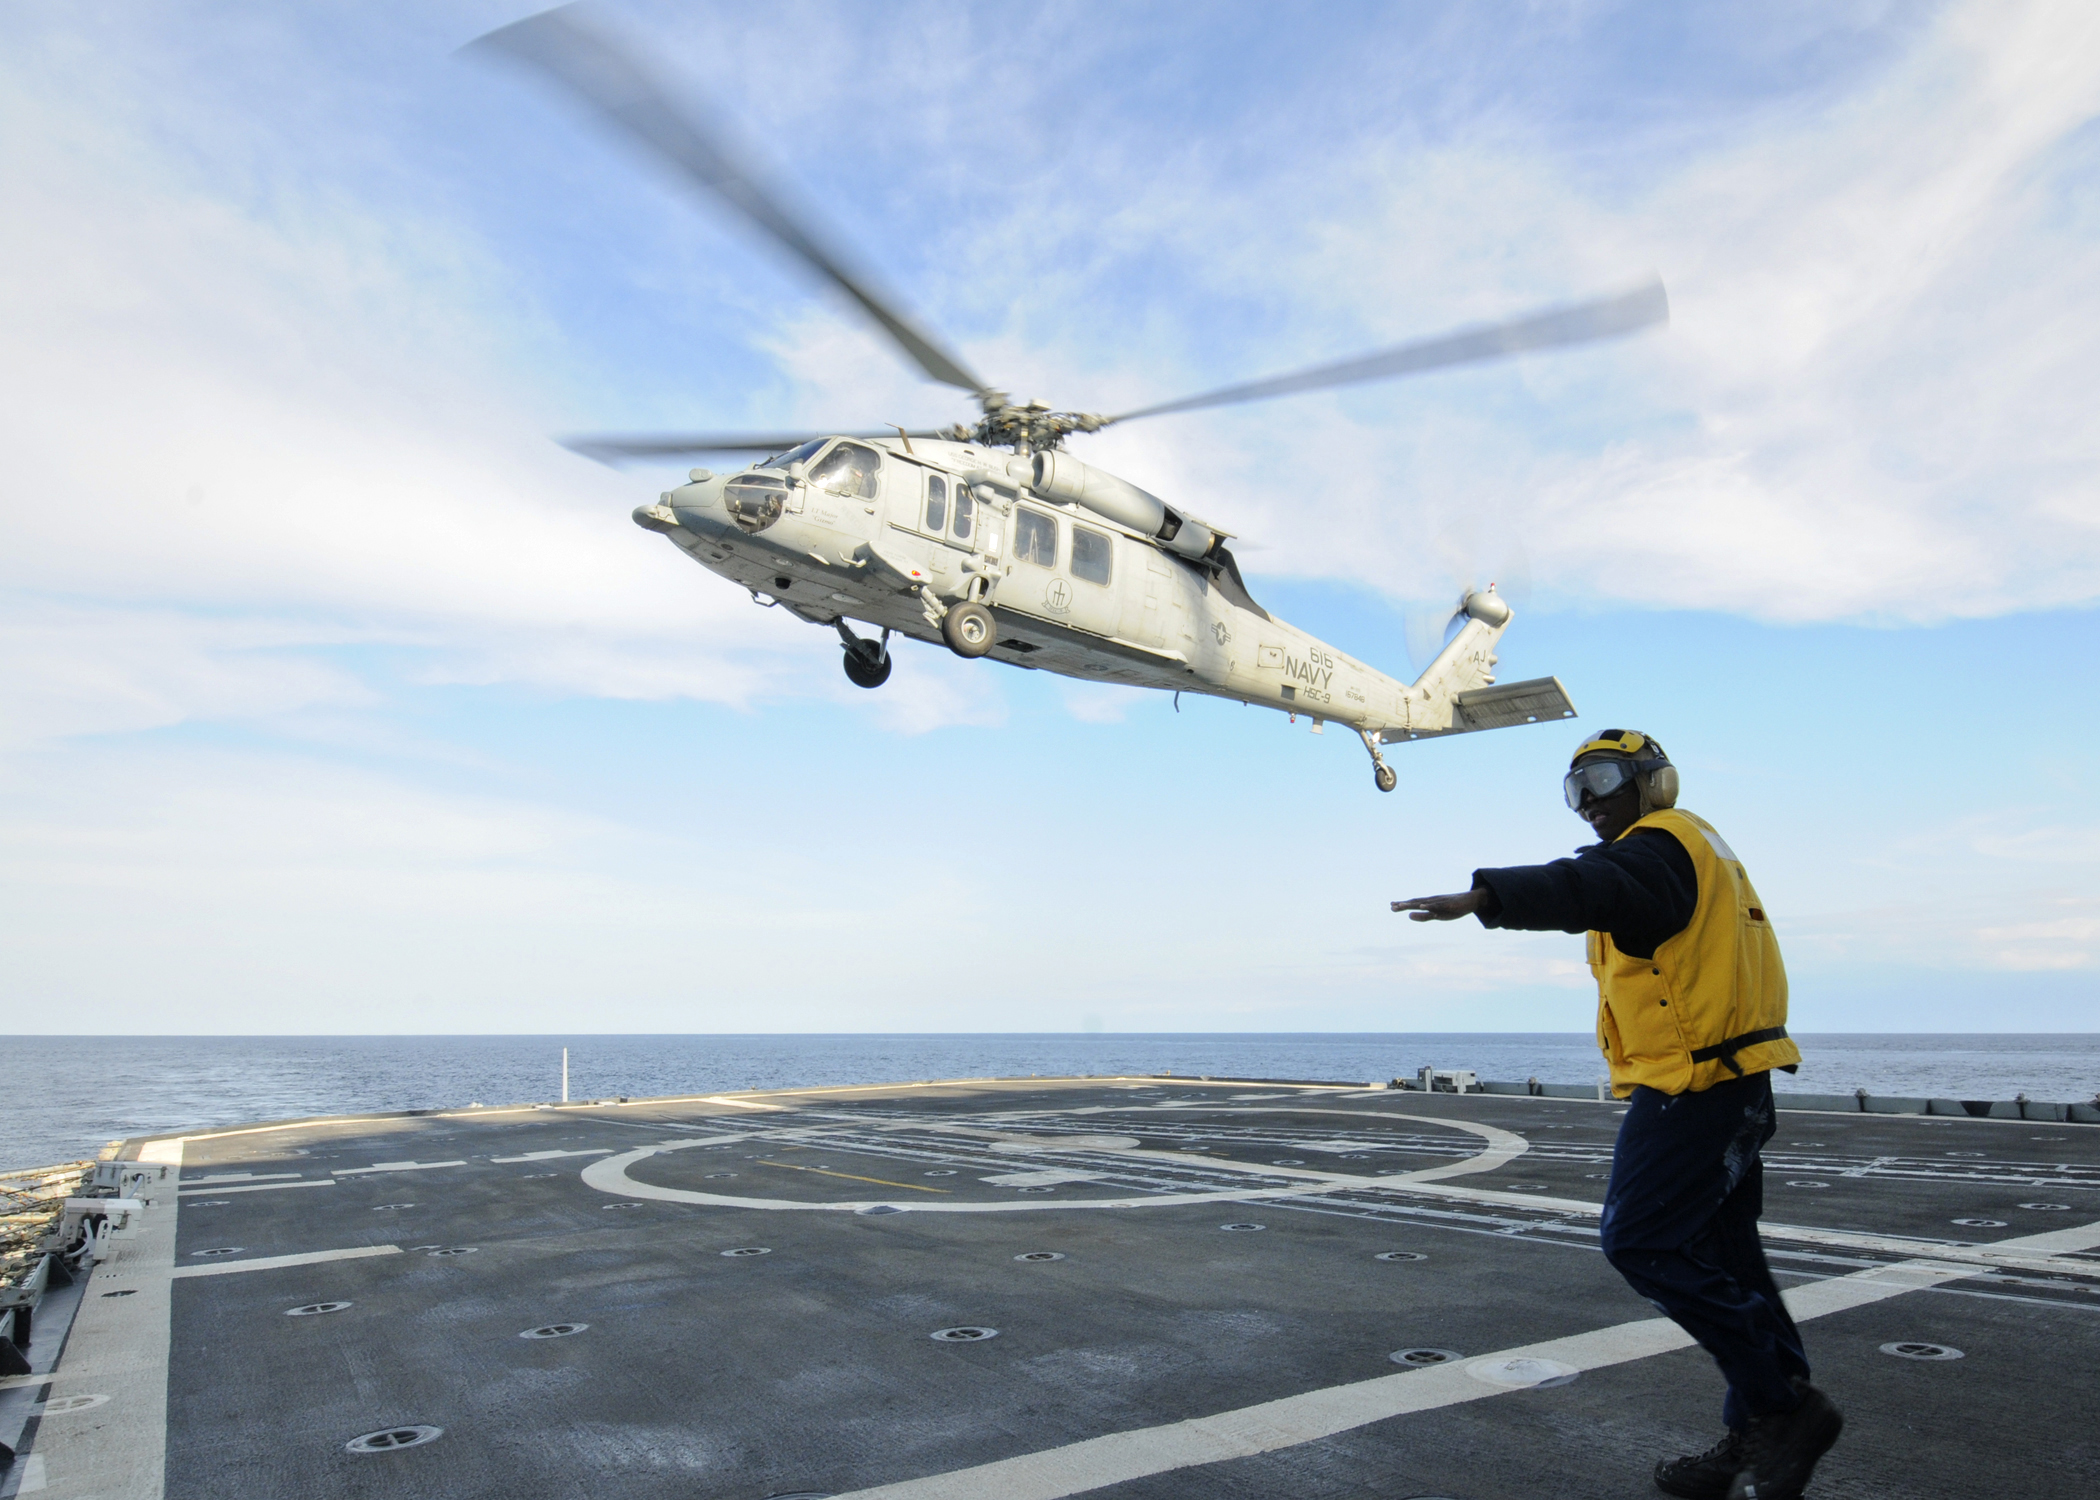 US Navy 110217-N-9793B-186 Boatswain's Mate 2nd Class Tyrone Williams directs an MH-60S Sea Hawk helicopter assigned to Helicopter Sea Combat (HSC)